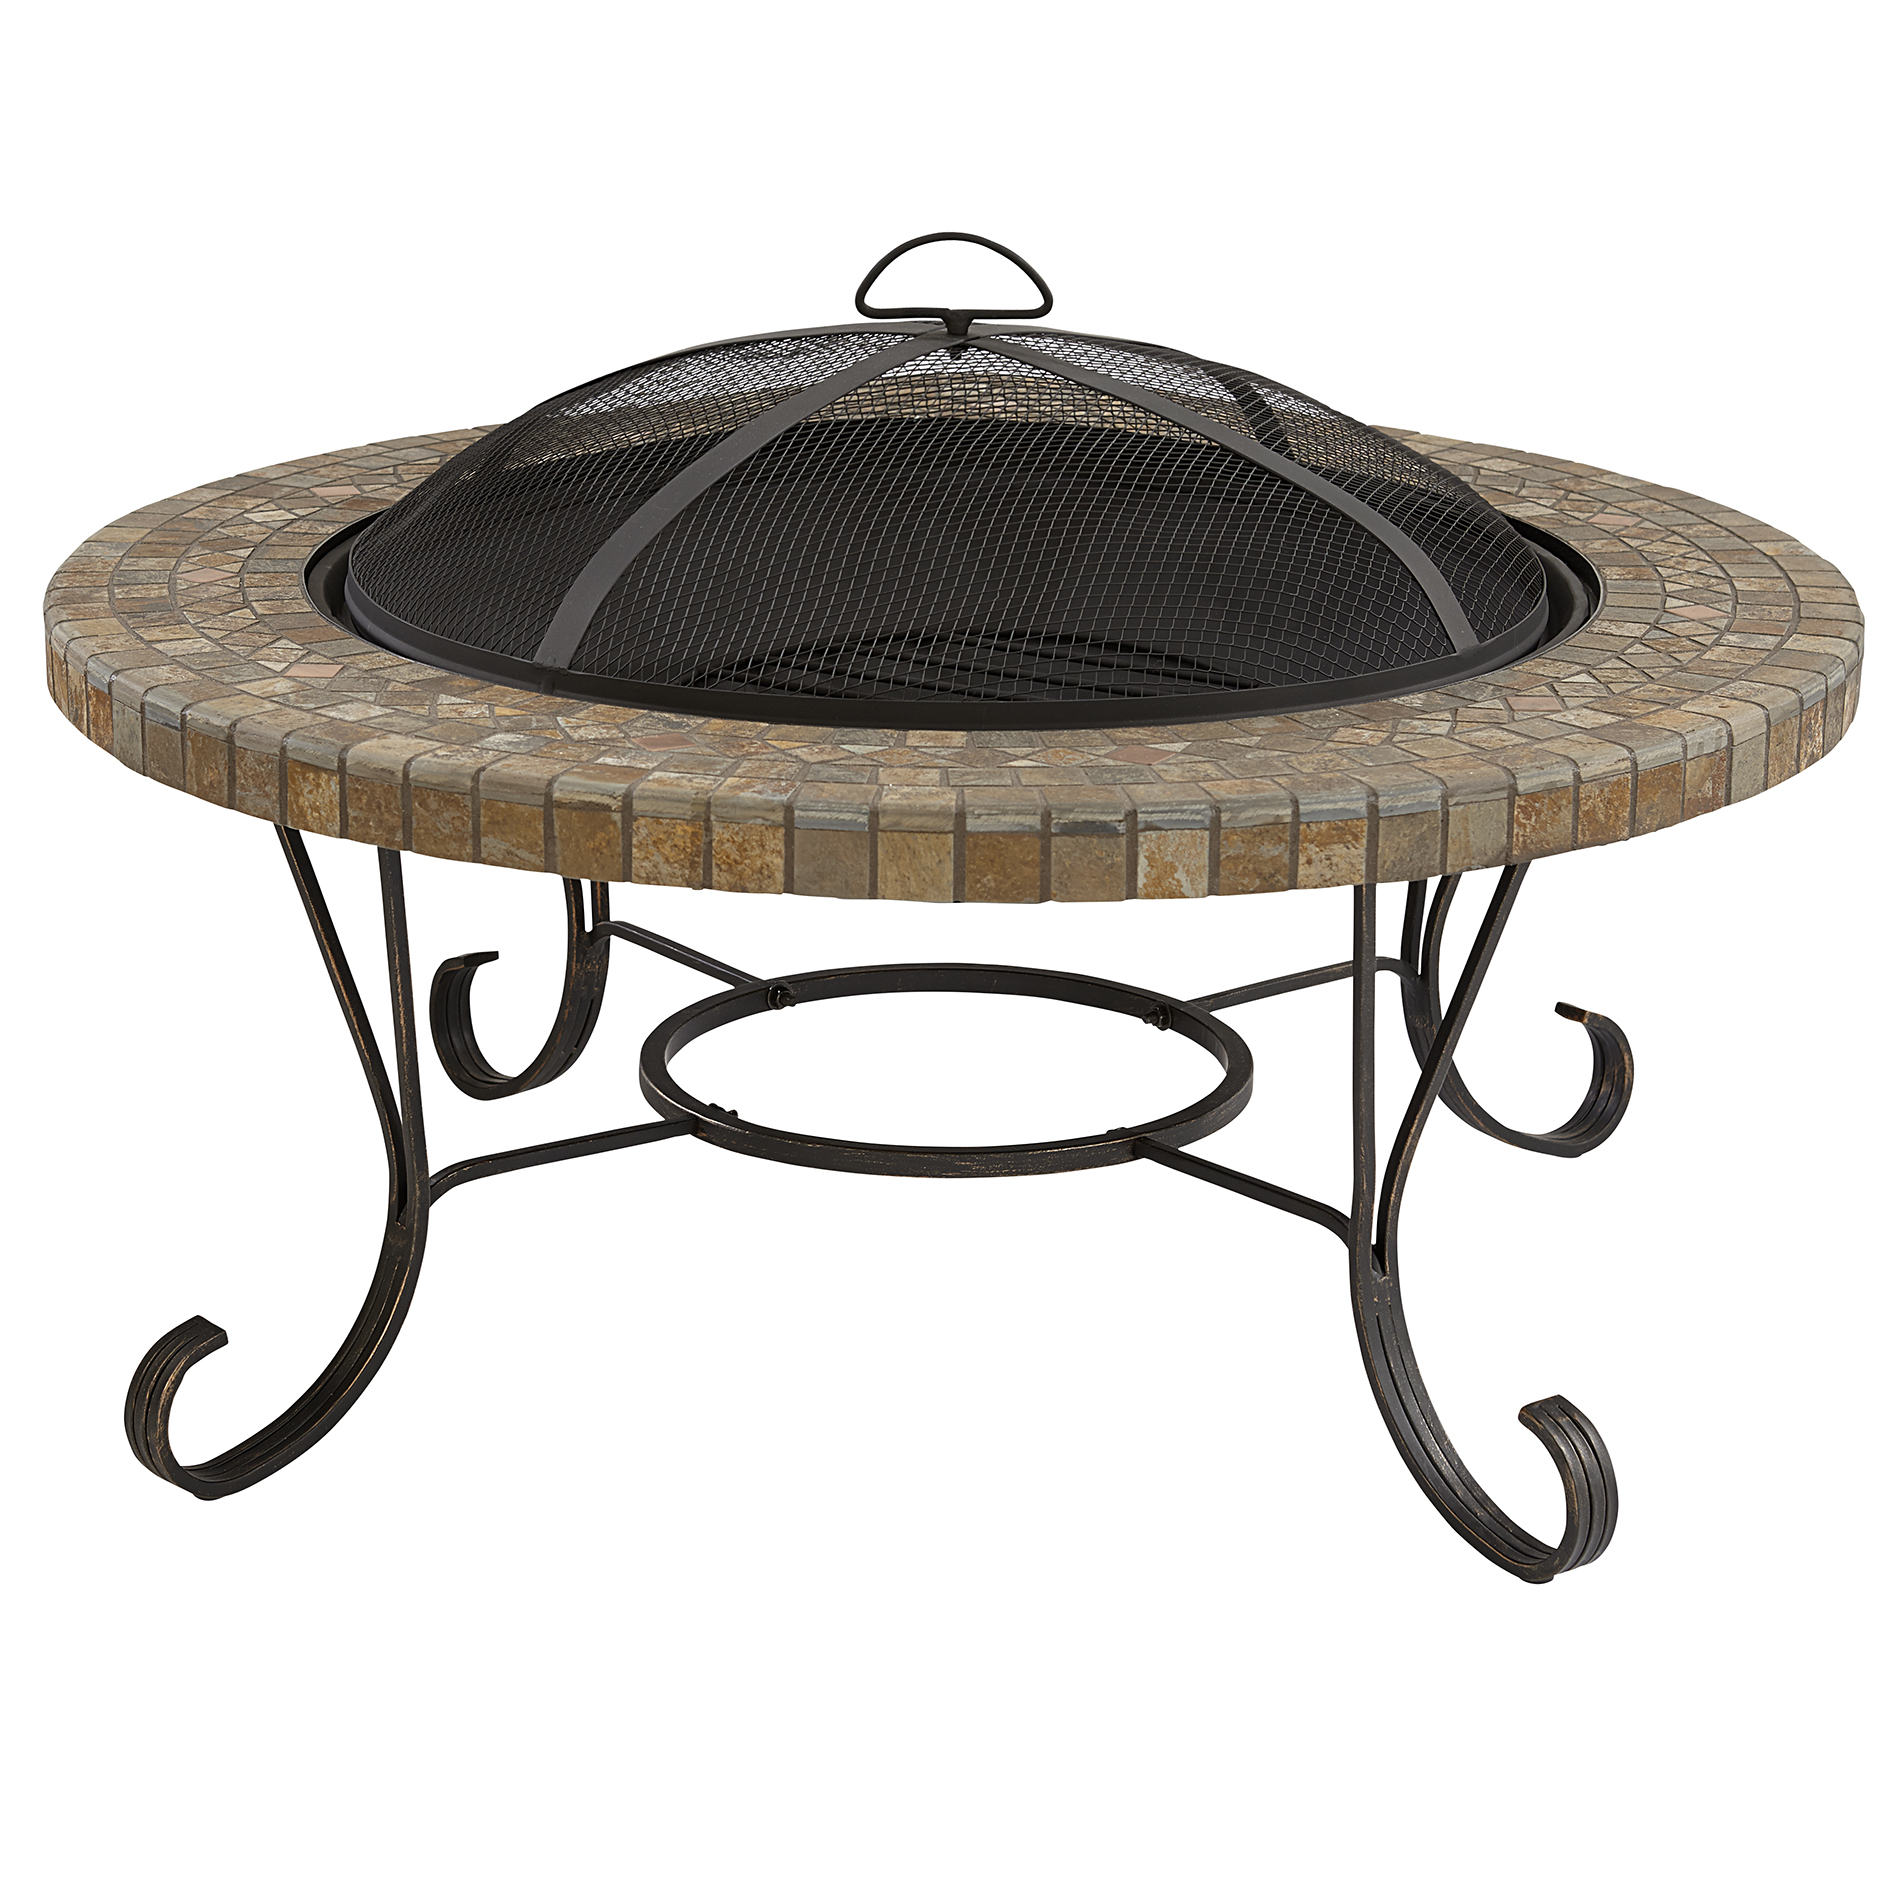 Bbq Pro Slate Tile Top Fire Pit 34, Fire Pit With Slate Top